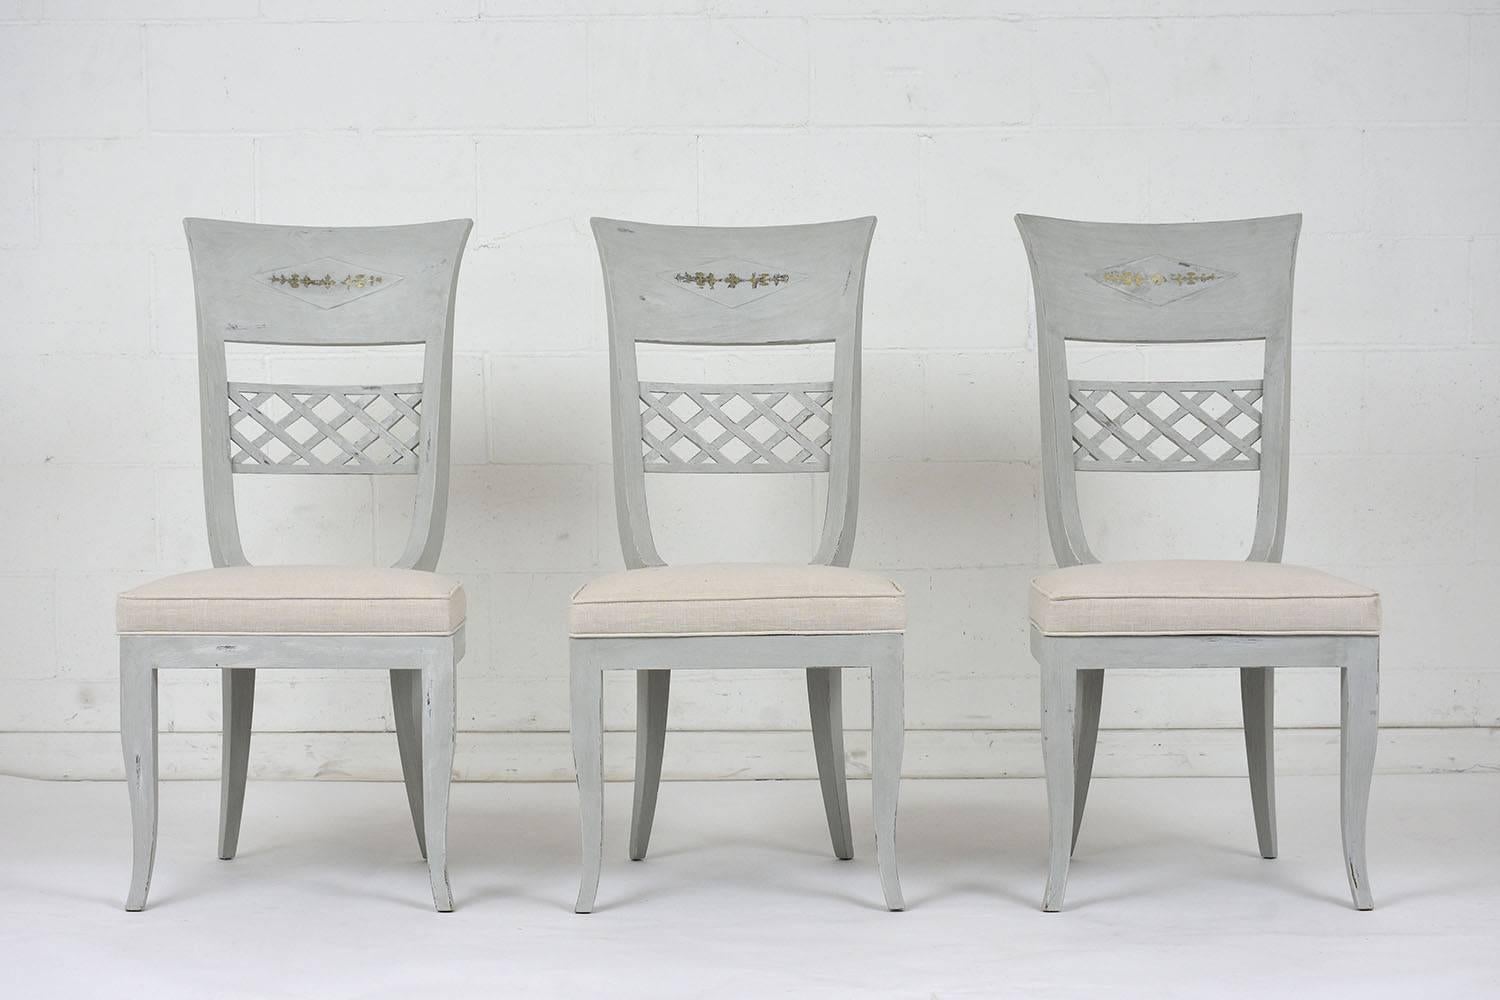 This set of six 1970's Hollywood Regency-style Dining Chairs has solid wood frames that have been newly painted in a soft gray & off-white color combination with a distressed finish and have been newly restored. The chairs feature a high back